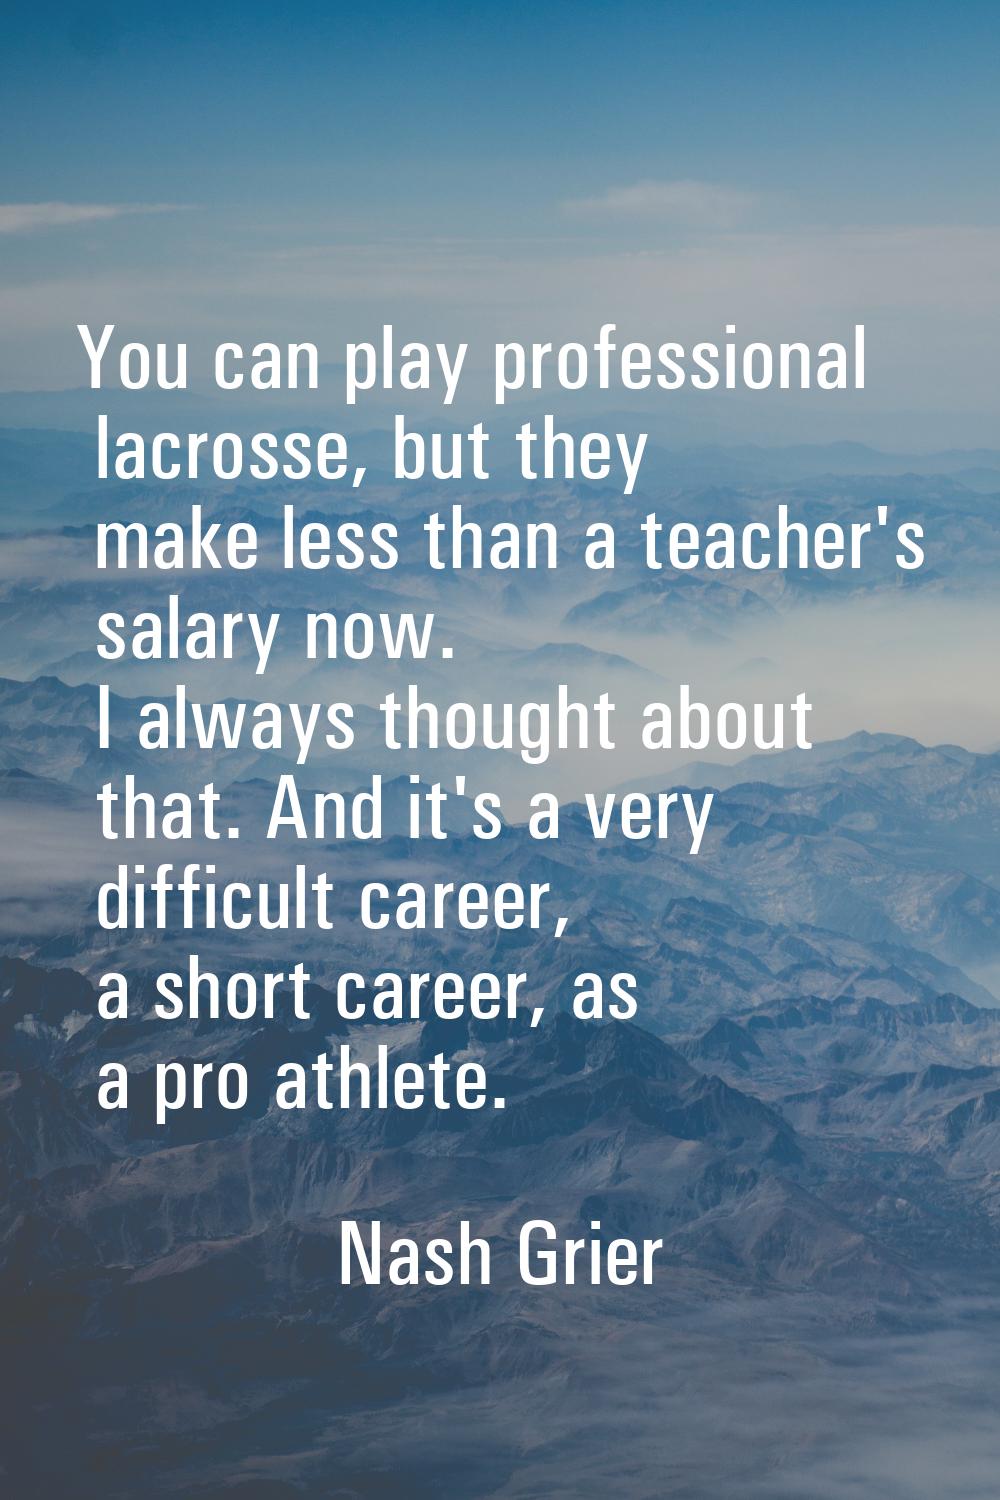 You can play professional lacrosse, but they make less than a teacher's salary now. I always though